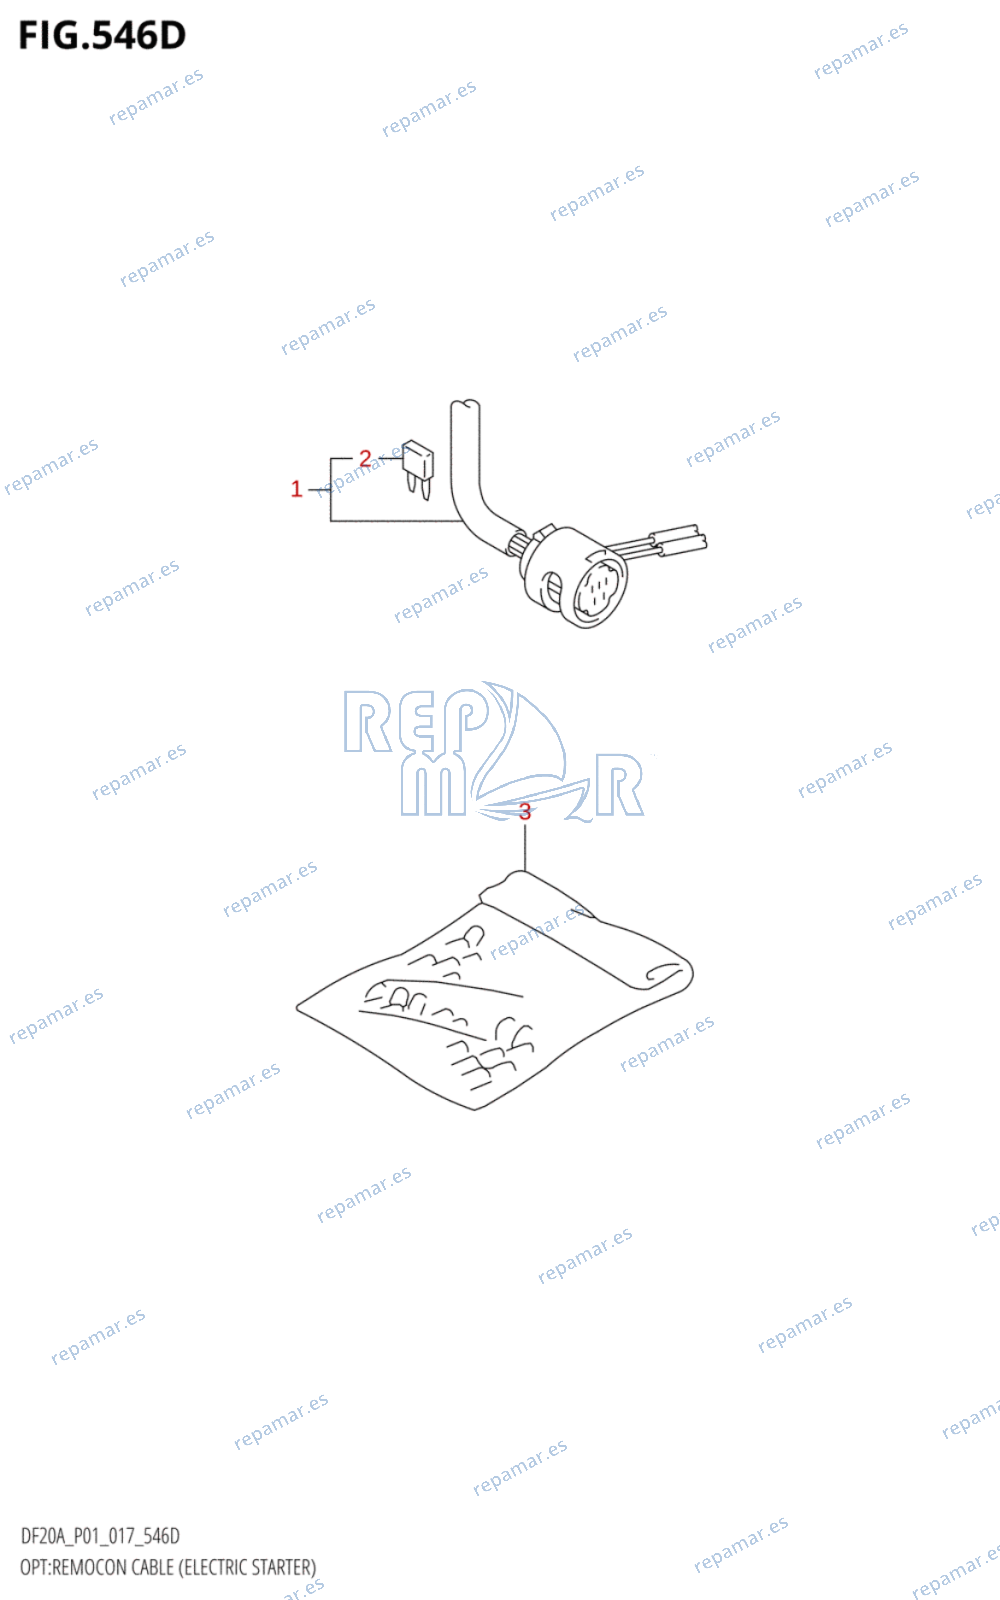 546D - OPT:REMOCON CABLE (ELECTRIC STARTER) (DF20A:P01)